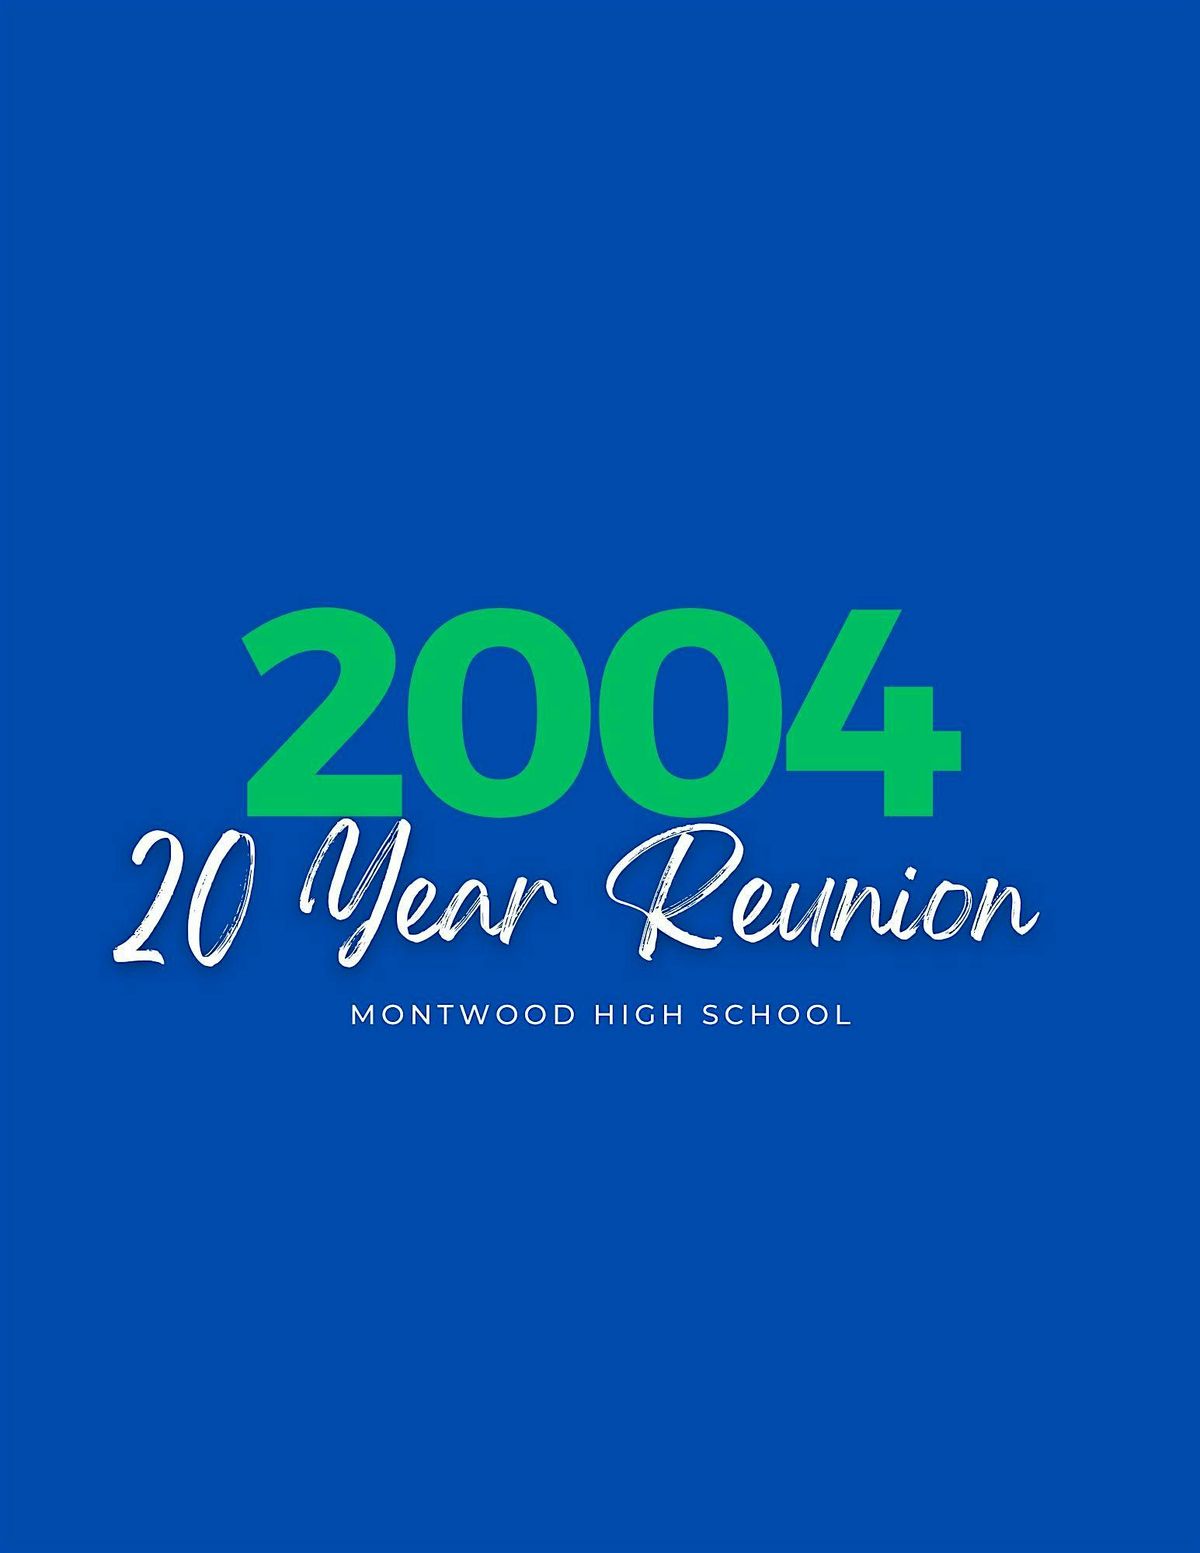 Montwood High School c\/o 2004 20 Year Reunion